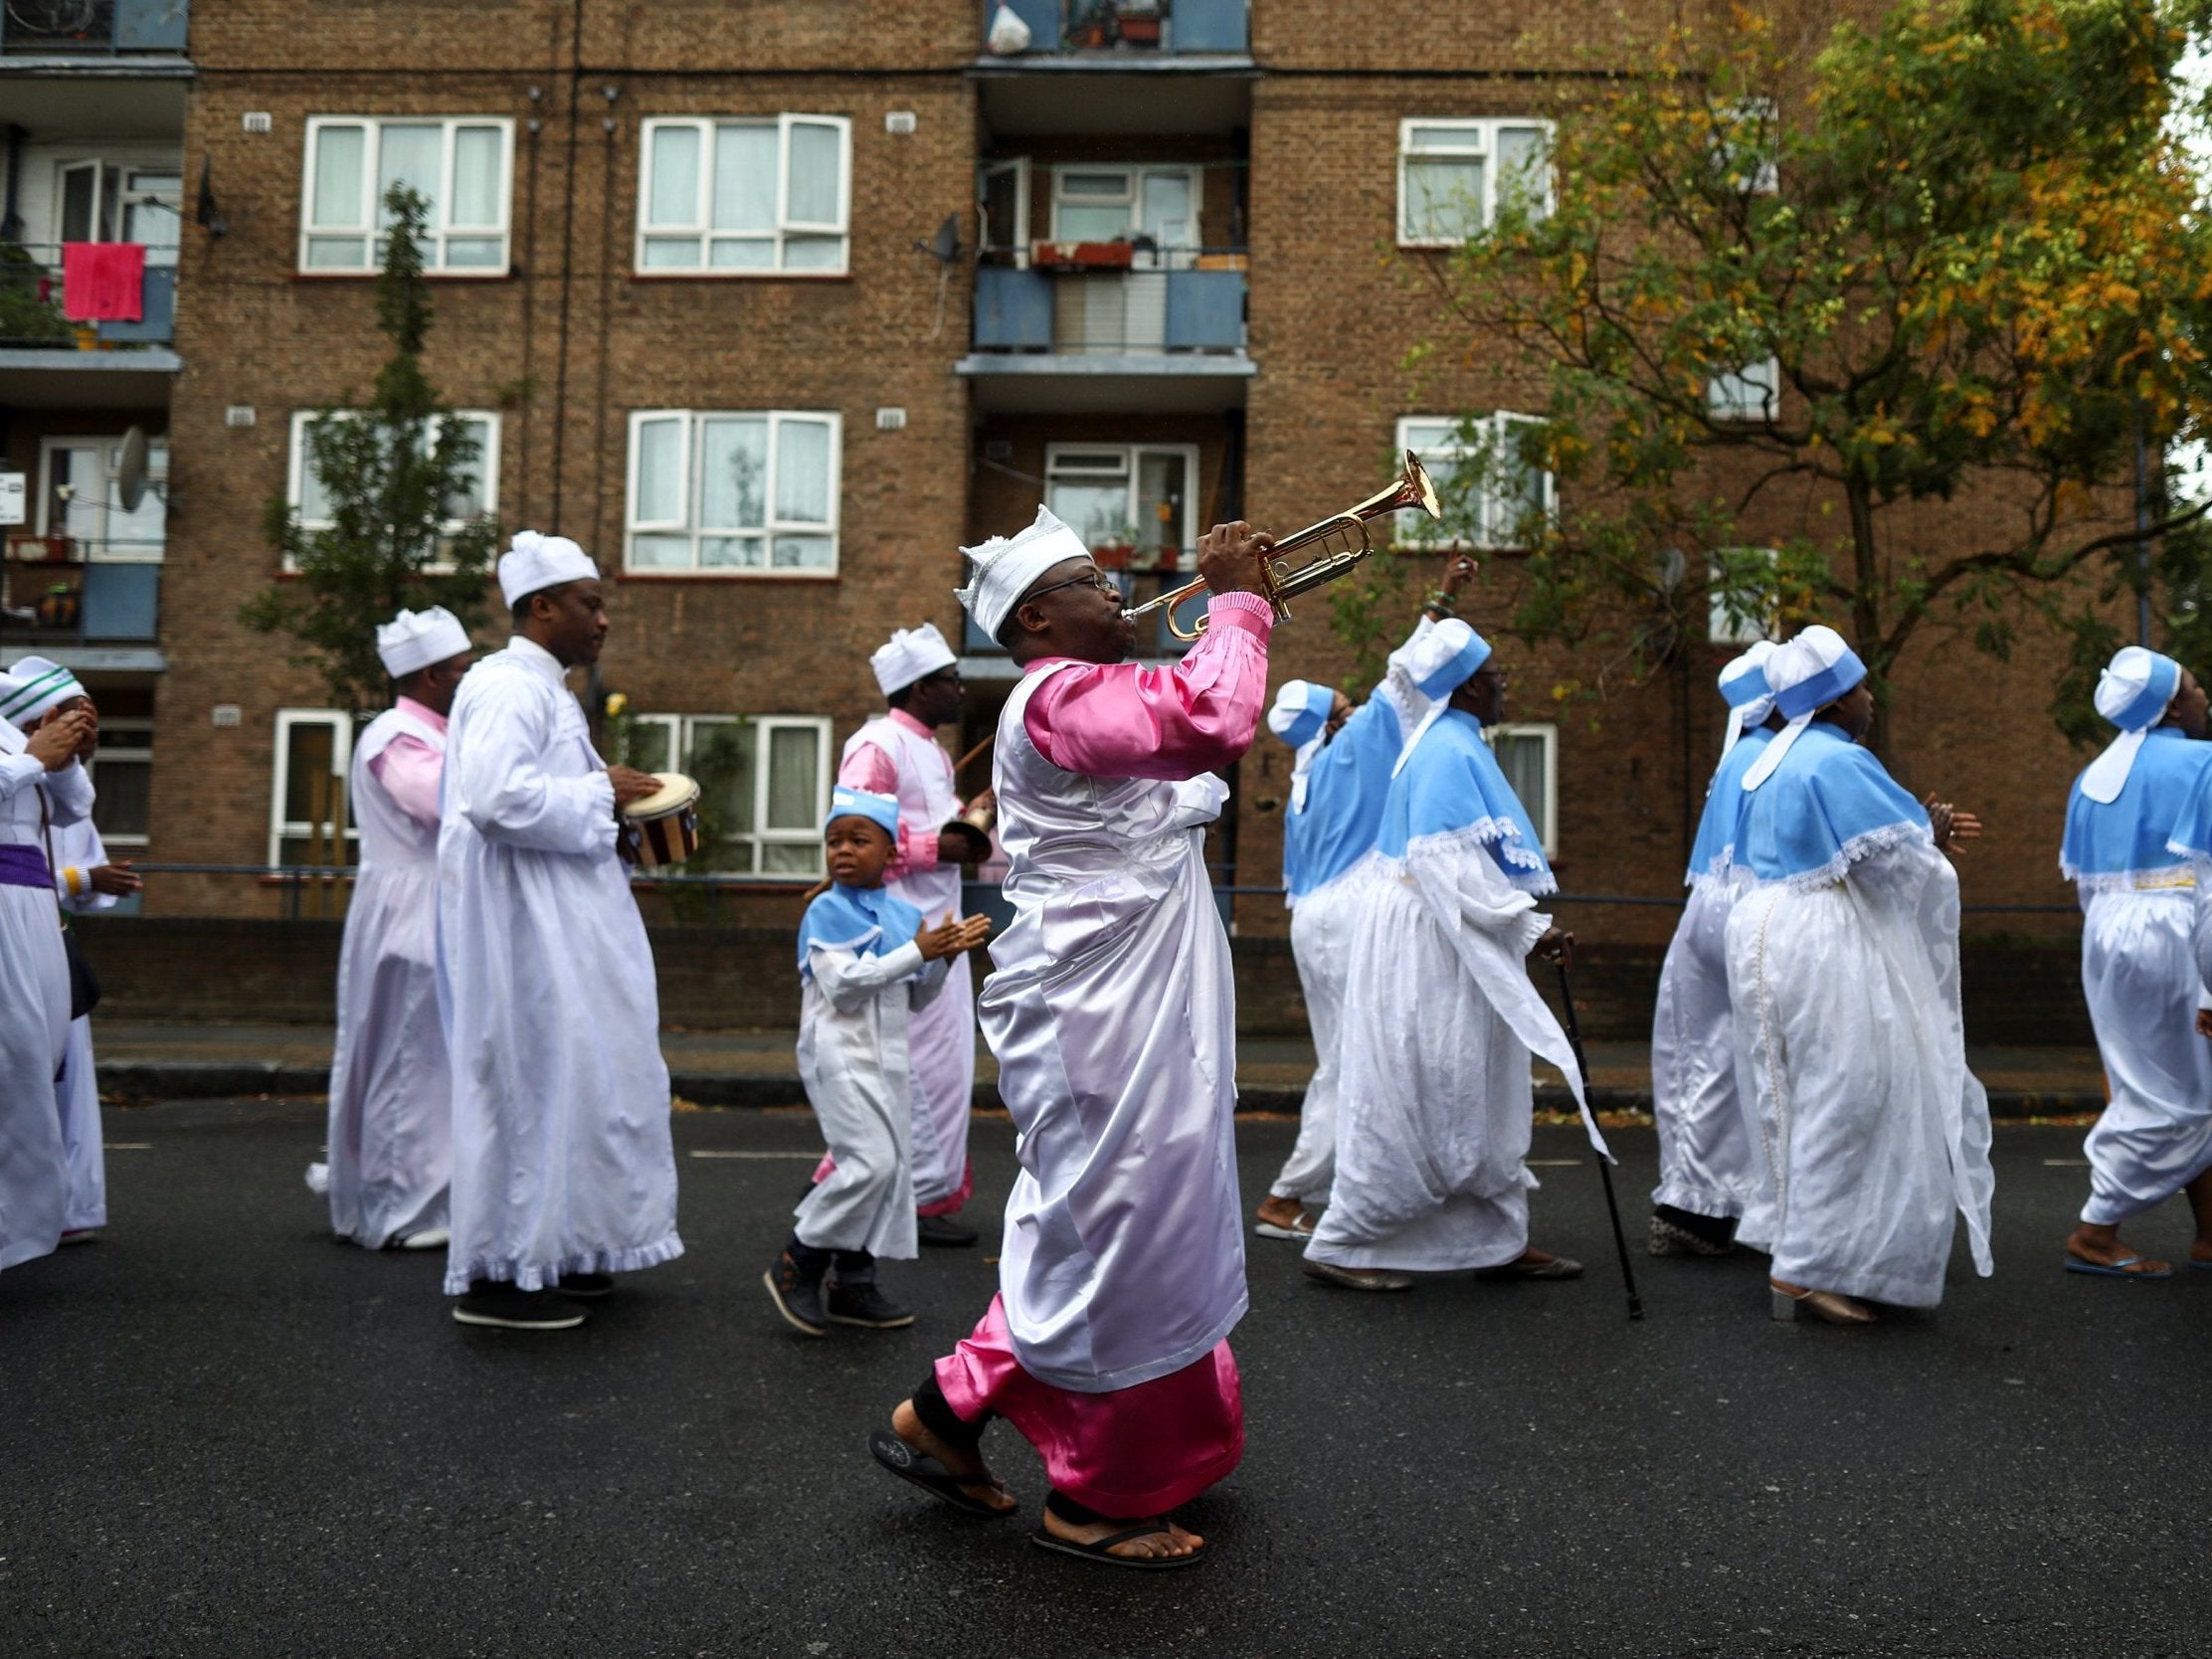 Members of the Eternal Sacred Order of Cherubim & Seraphim parade through the street to celebrate their annual Thanksgiving in Elephant and Castle